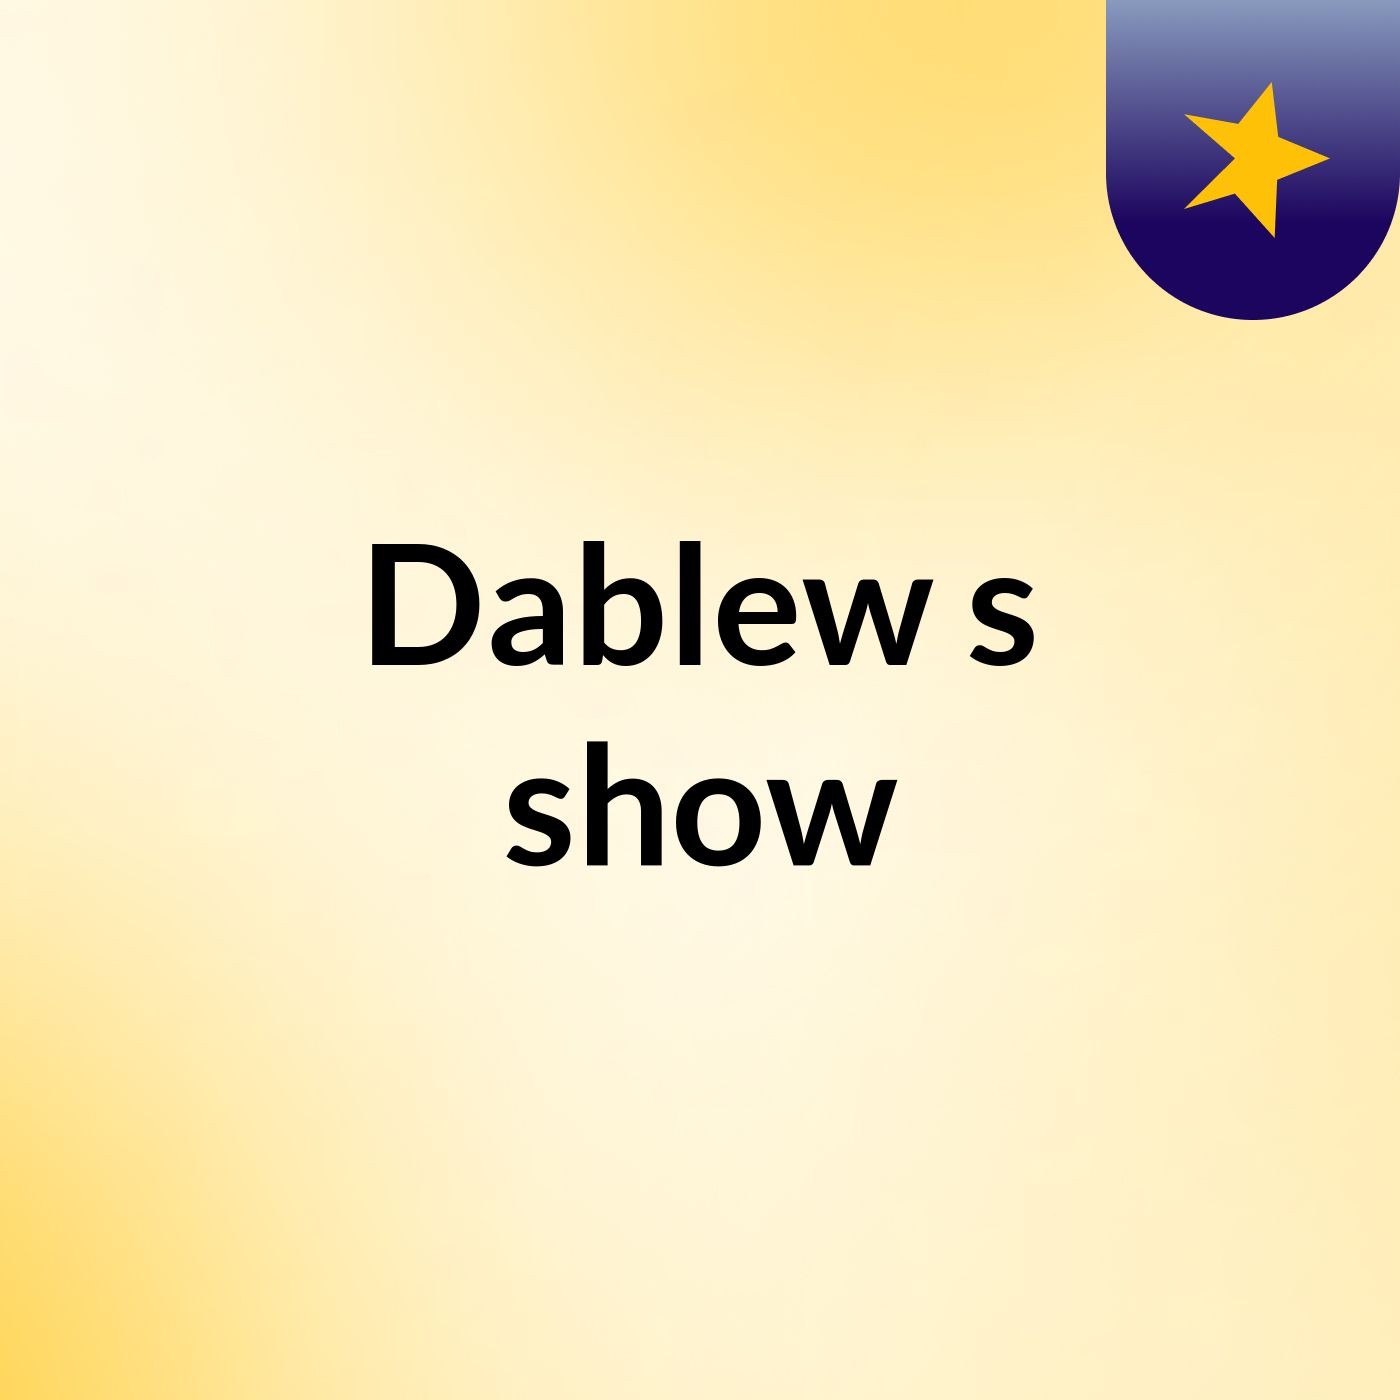 Dablew's show